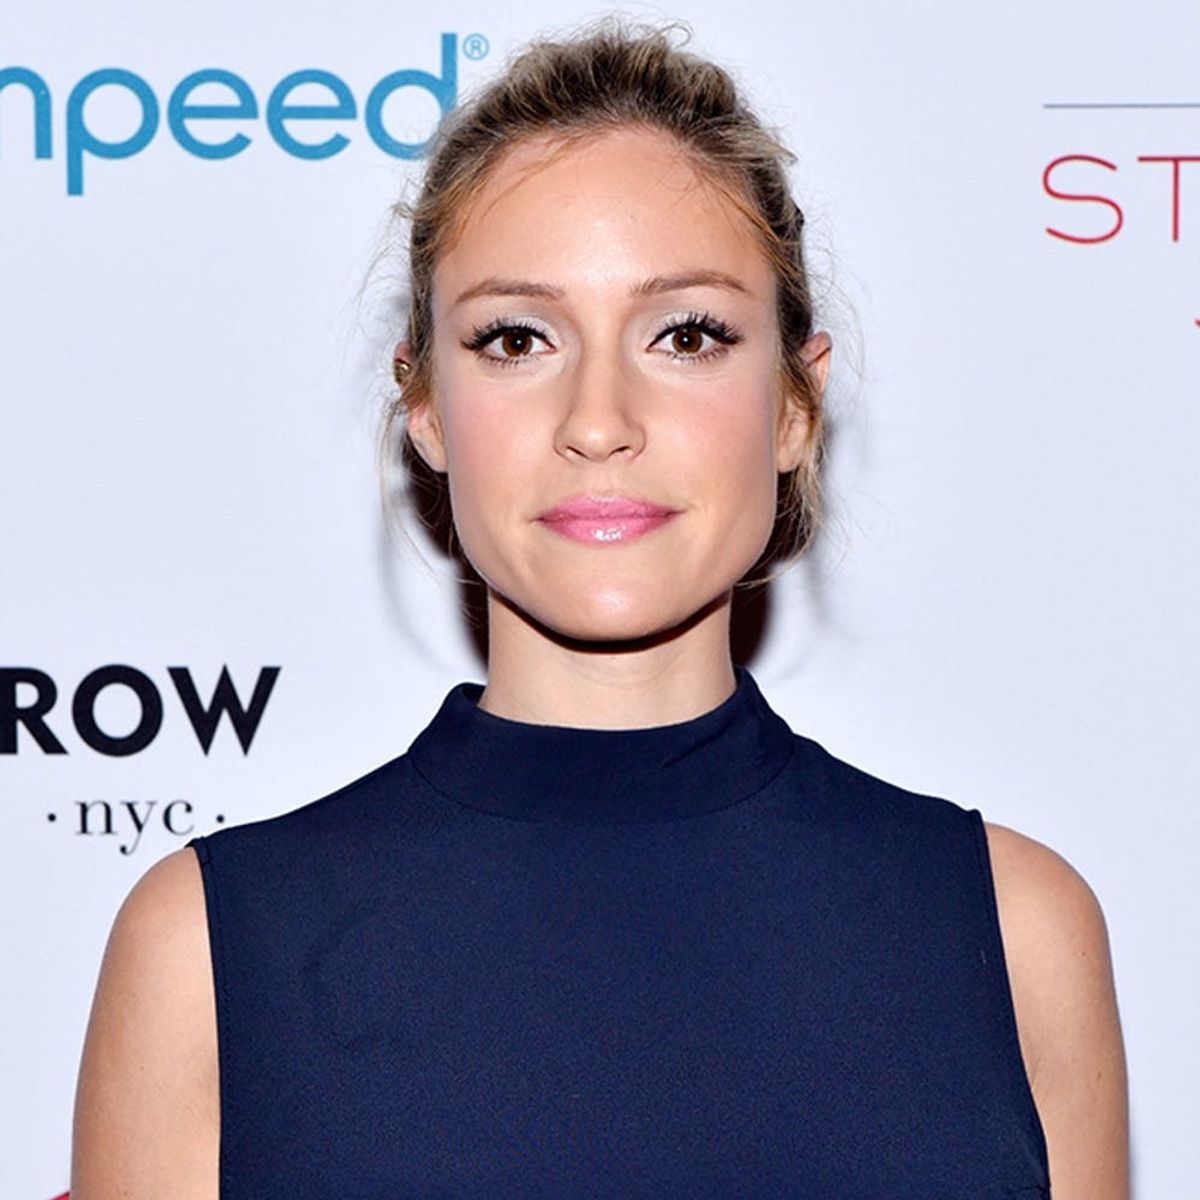 Kristin Cavallari’s Insanely Cute Baby Girl Makes Her (Real) Debut